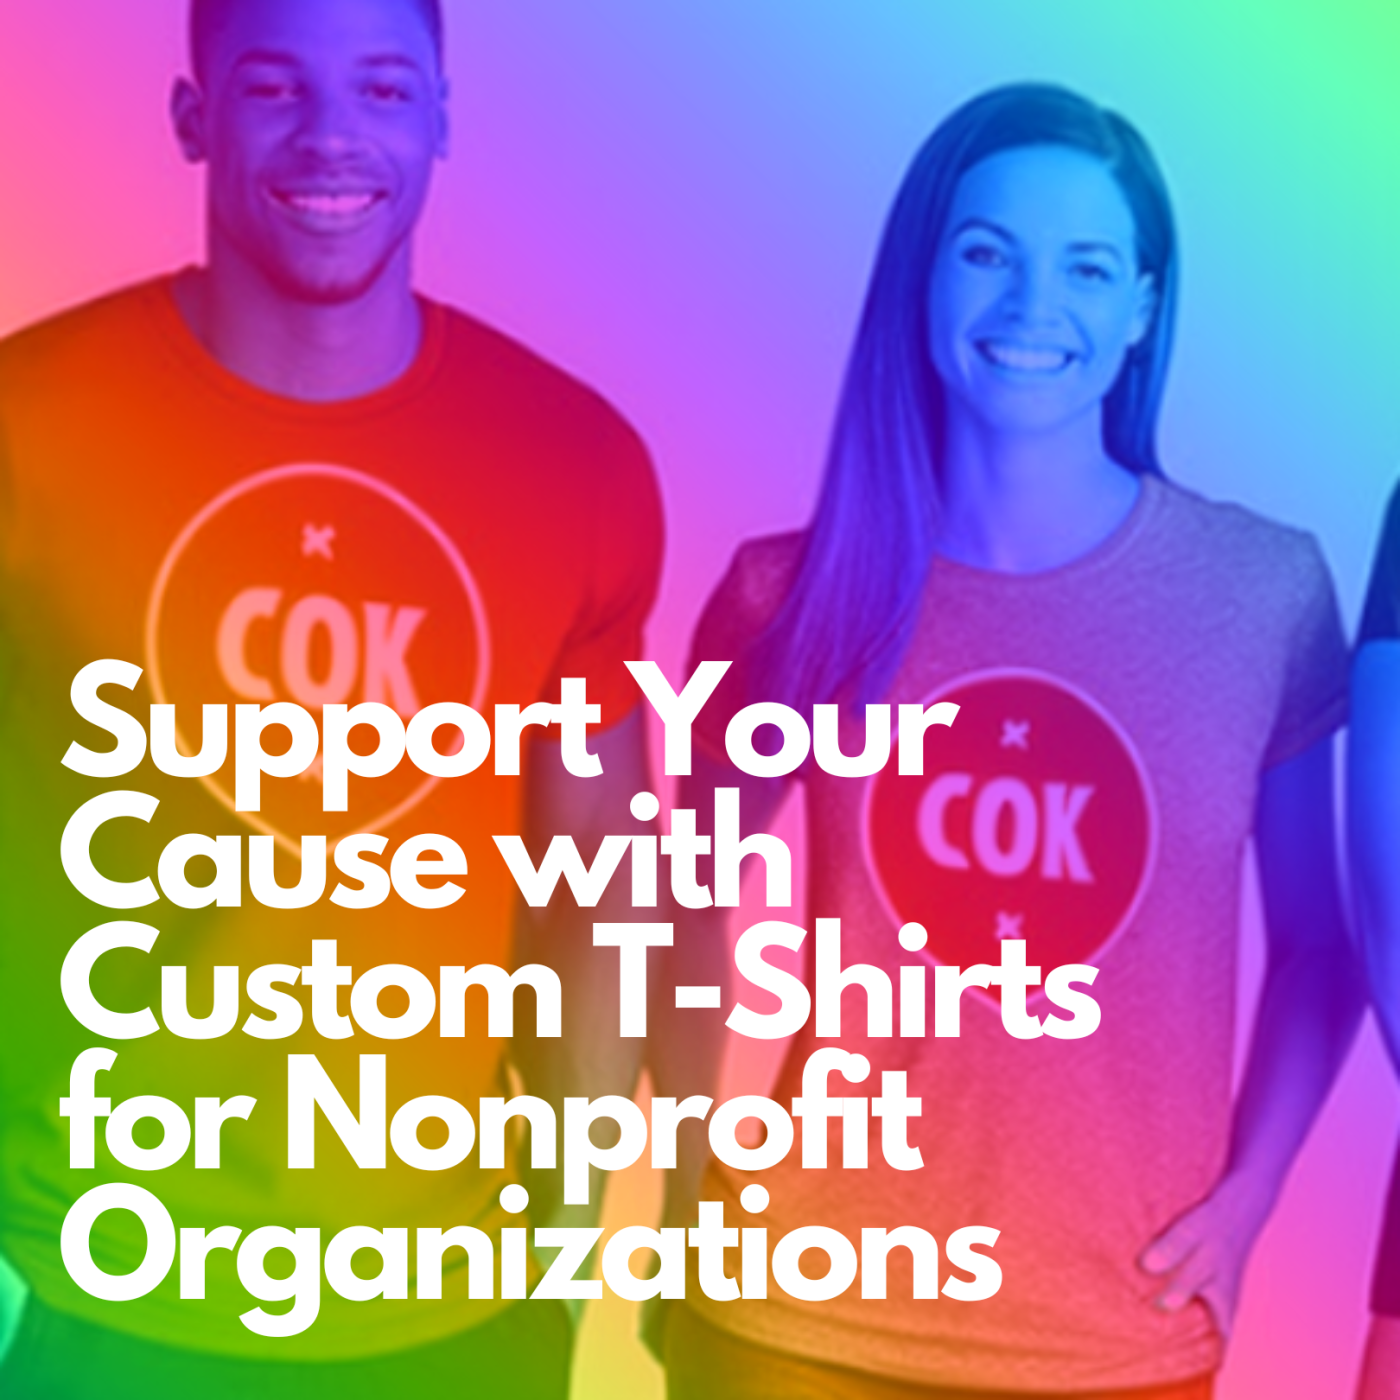 Support Your Cause with Custom T-Shirts for Nonprofit Organizations